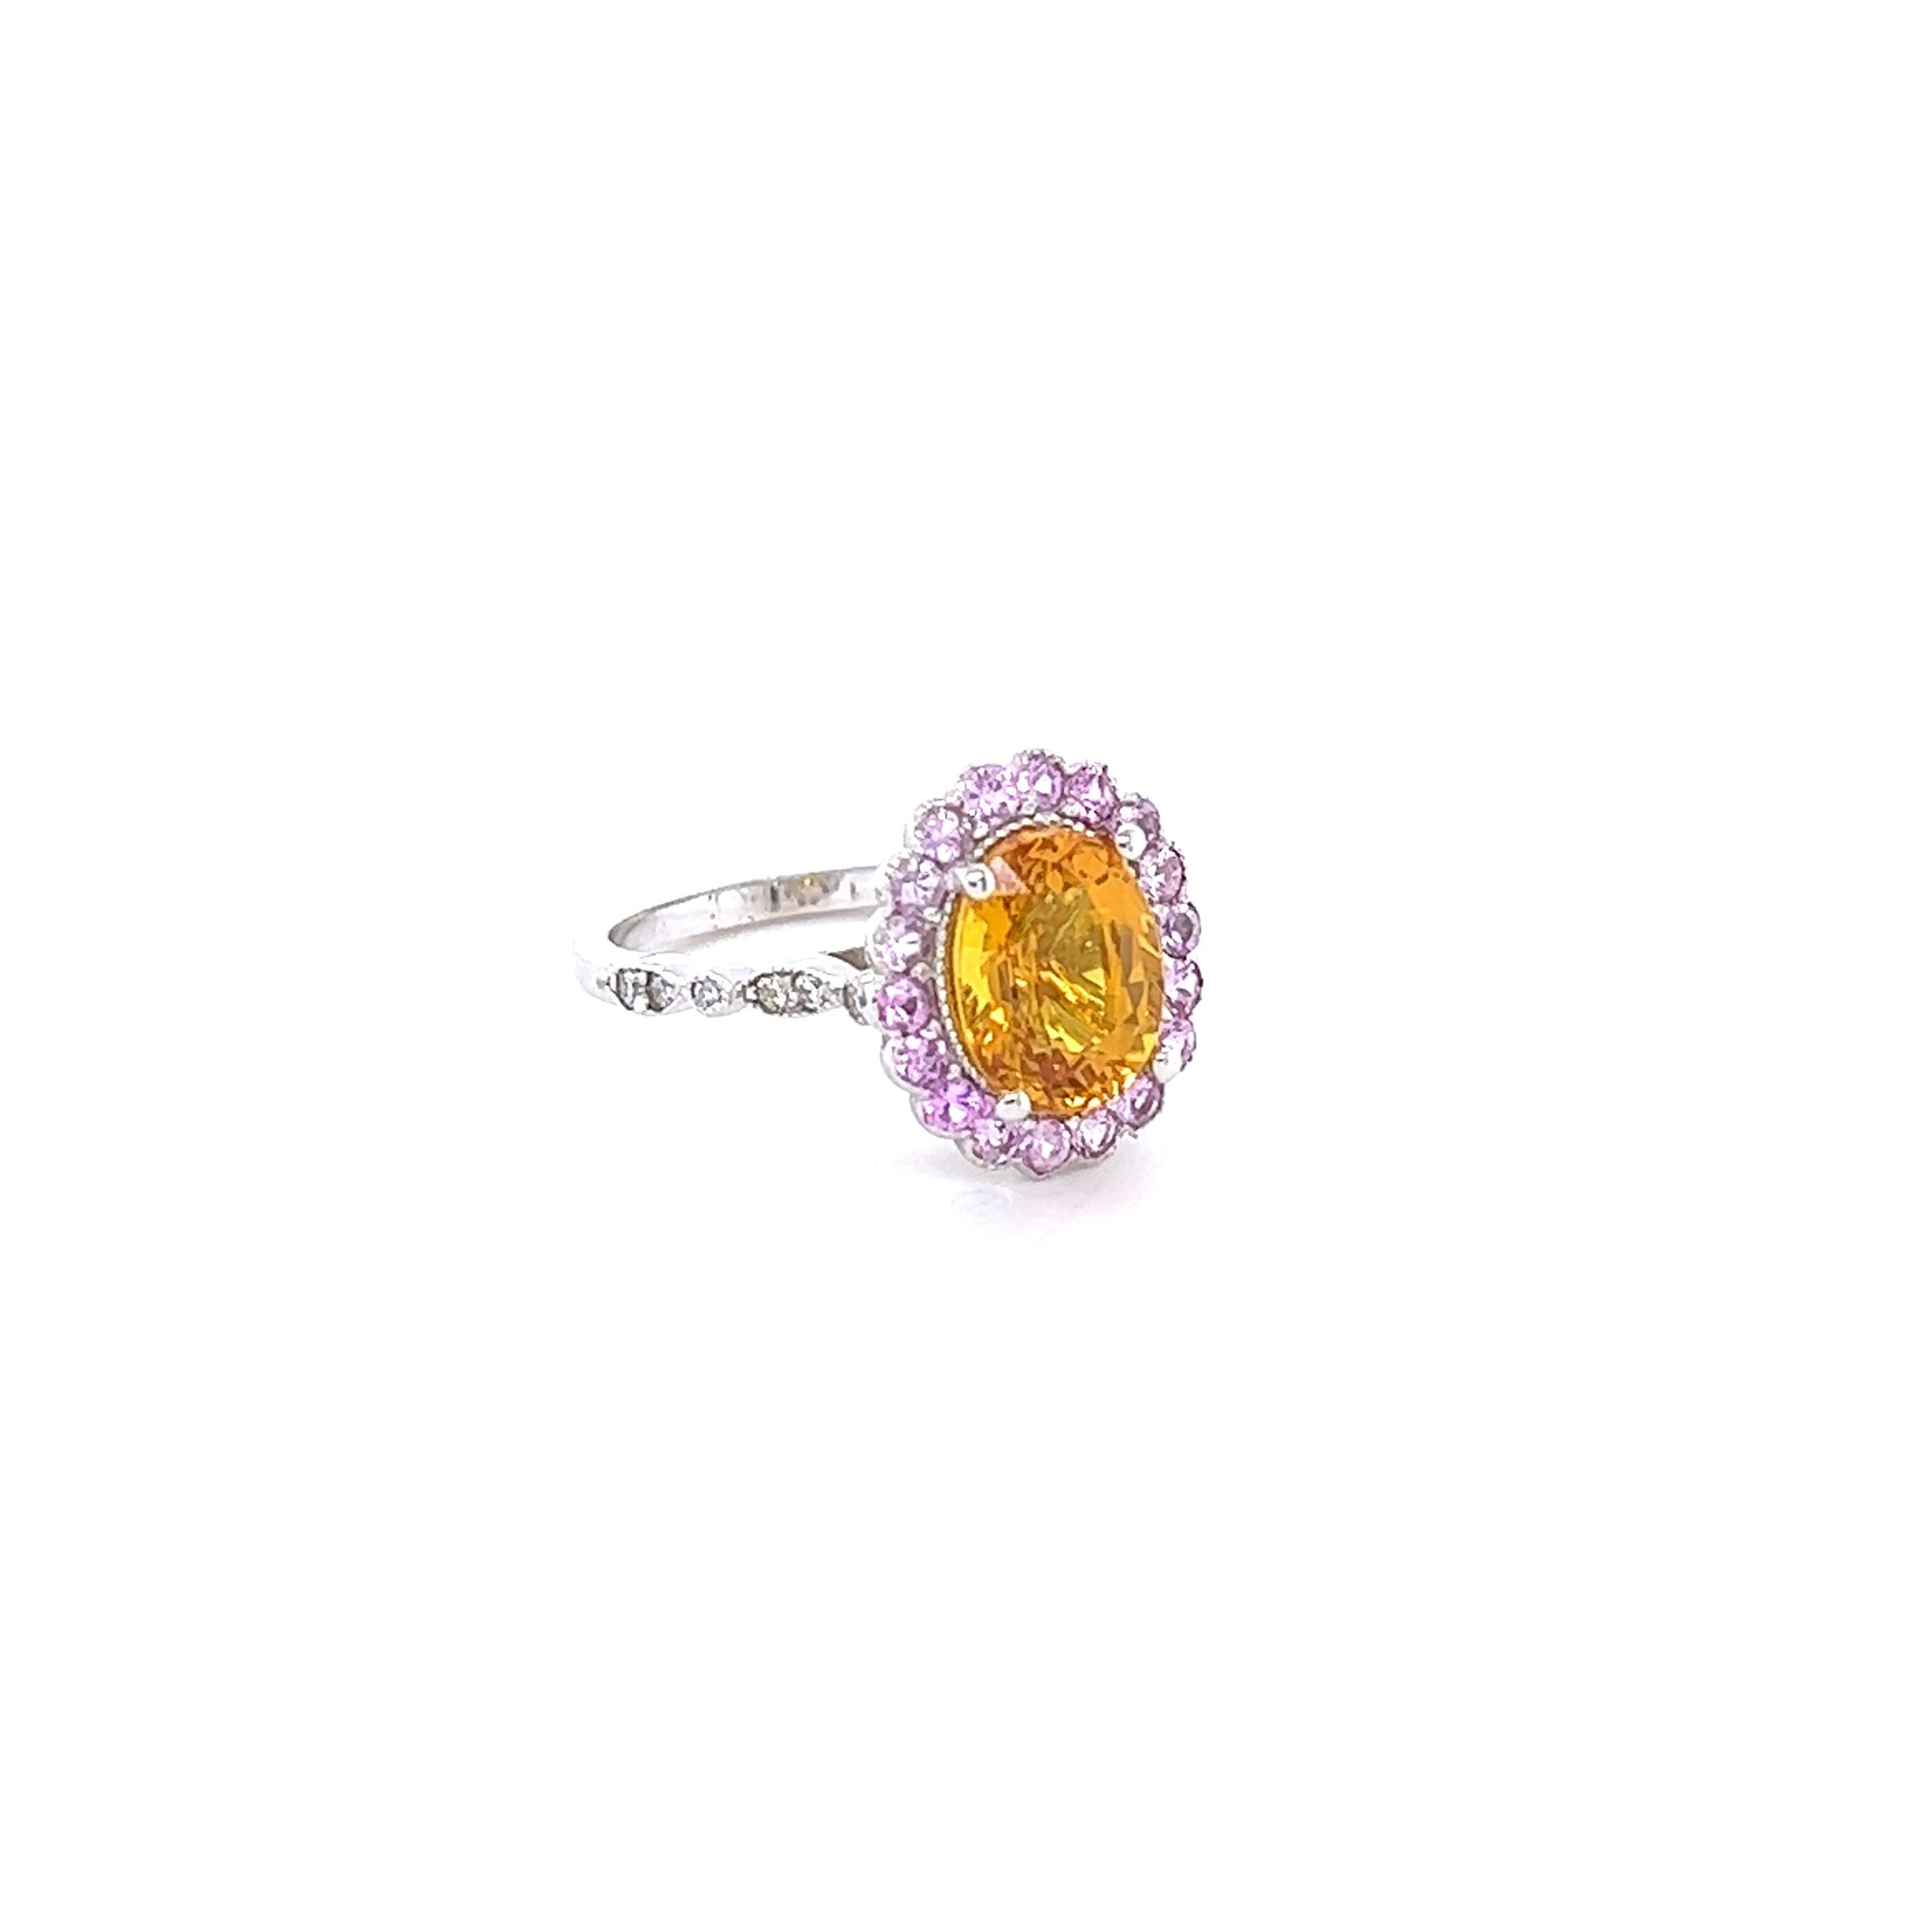 This beautiful ring has a Oval Cut Orange Sapphire that weighs 3.48 carats and measures at approximately 10 mm x 8 mm. The Orange Sapphire is Heated as per industry standards.

It is surrounded by a halo of 18 Pink Sapphires that weigh 0.65 Carats